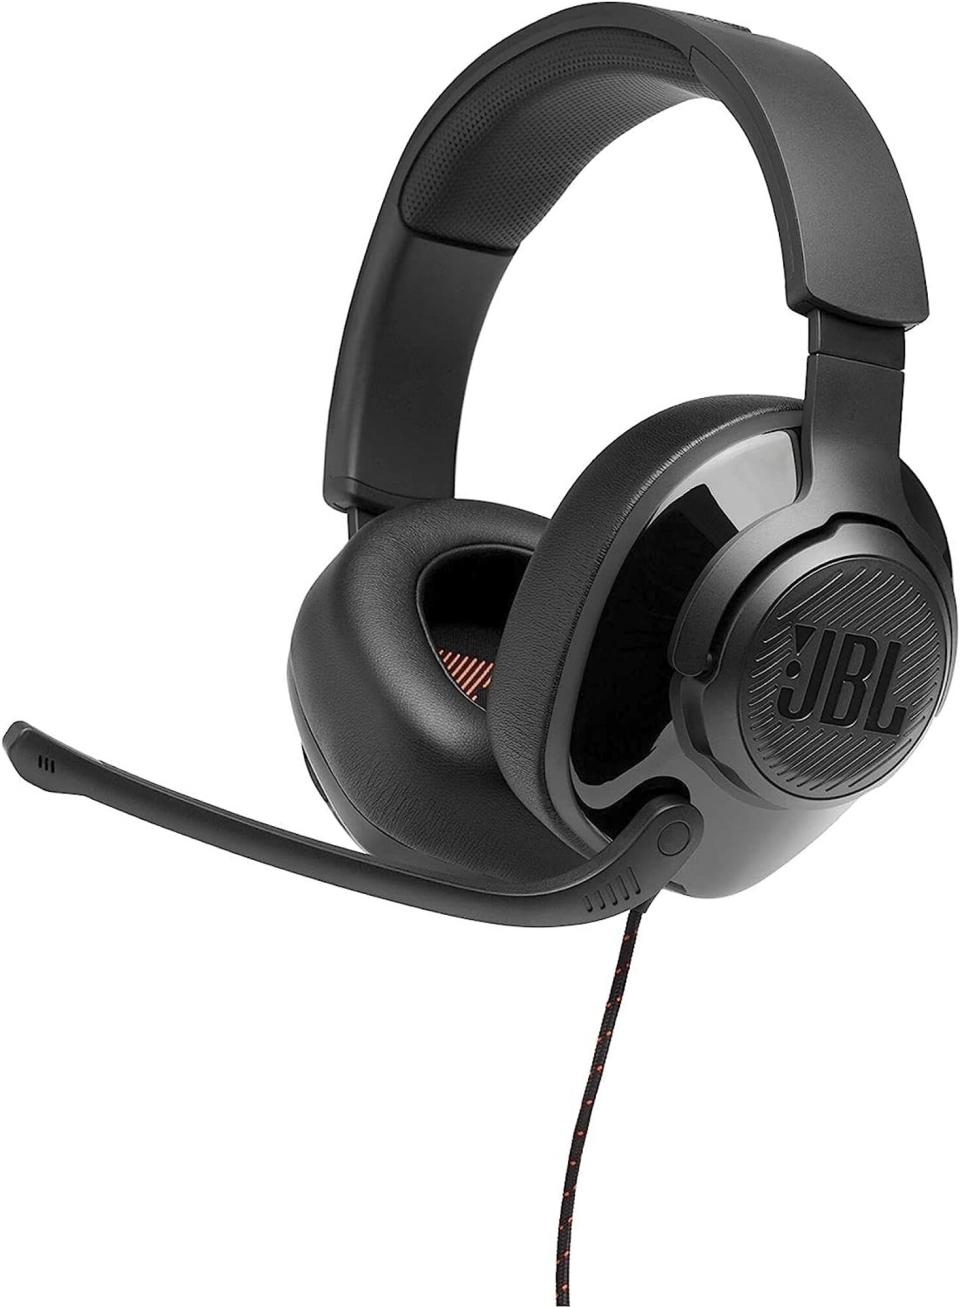 Gaming Headset Deals